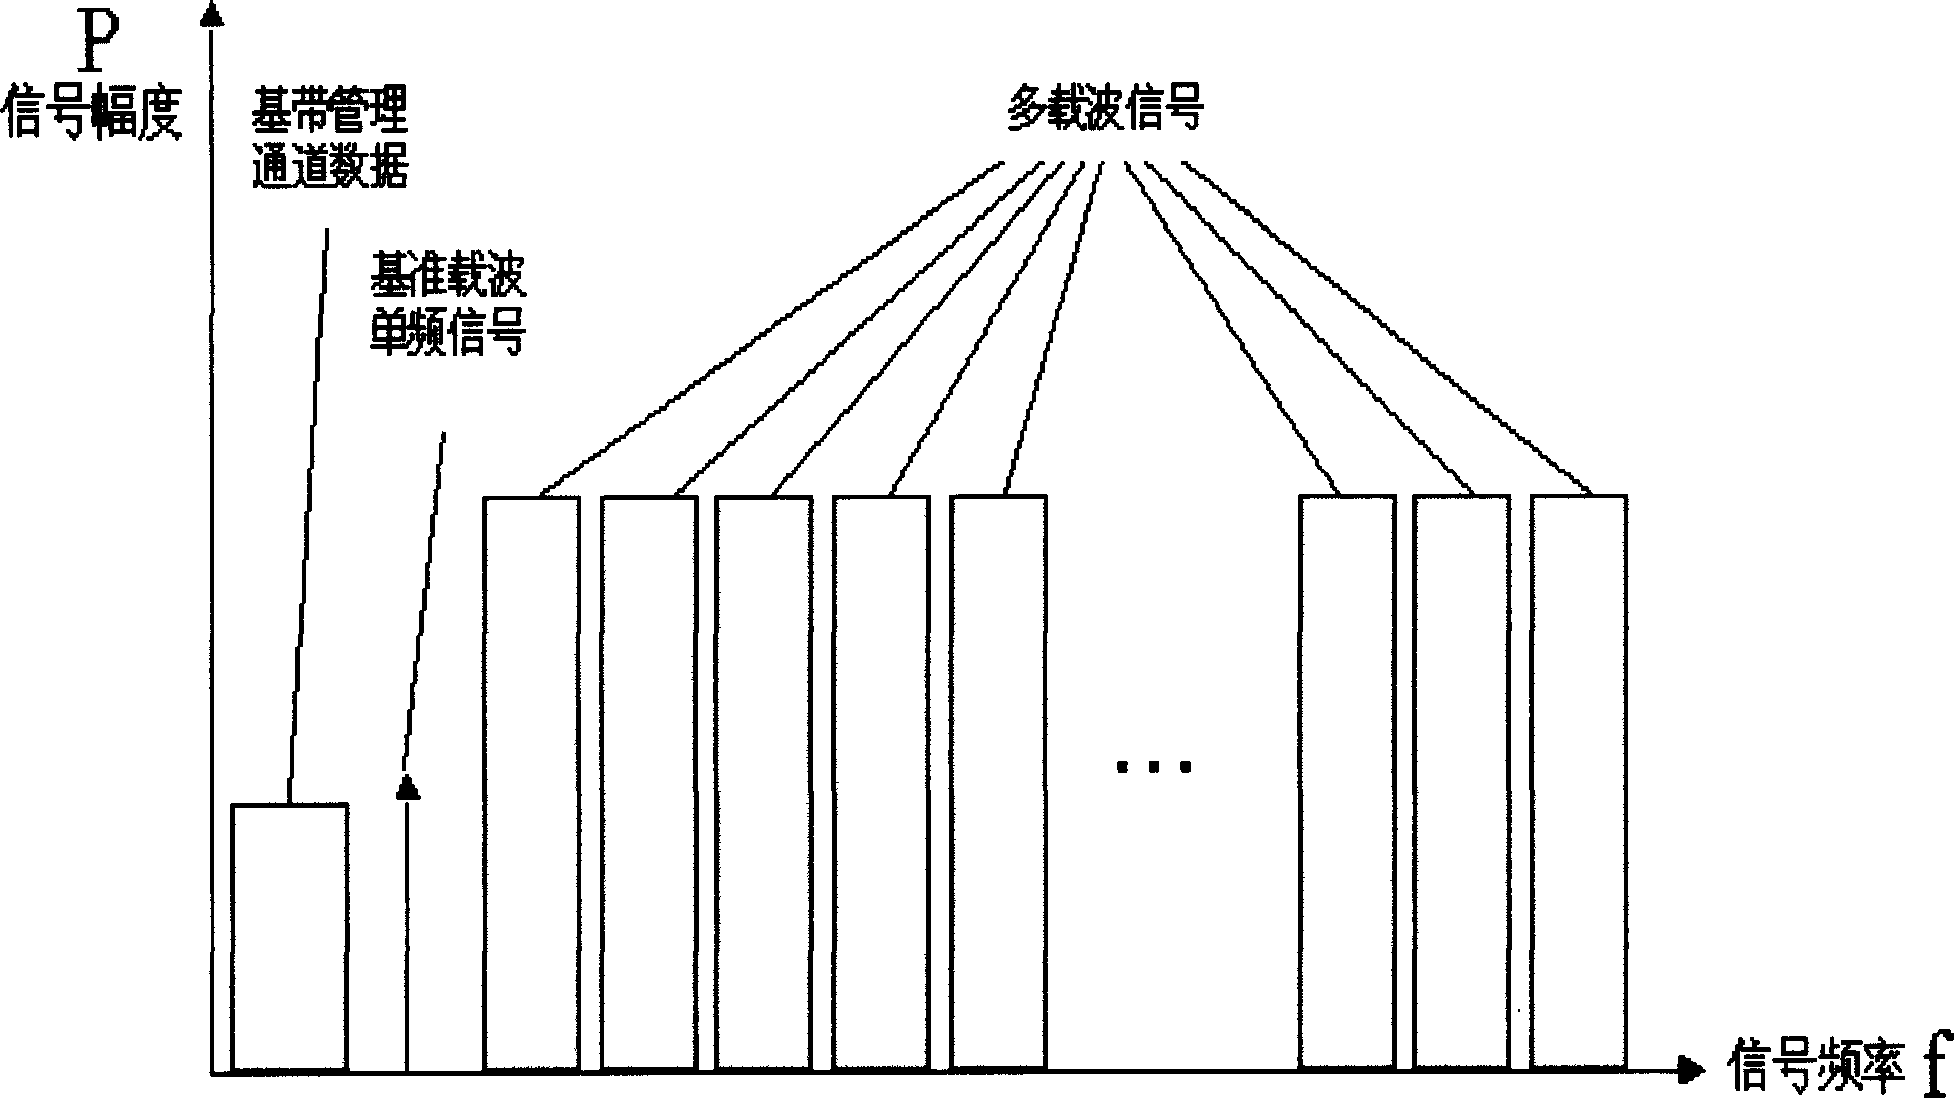 Multi-carrier light transmitting method of light access system with multi-path signal